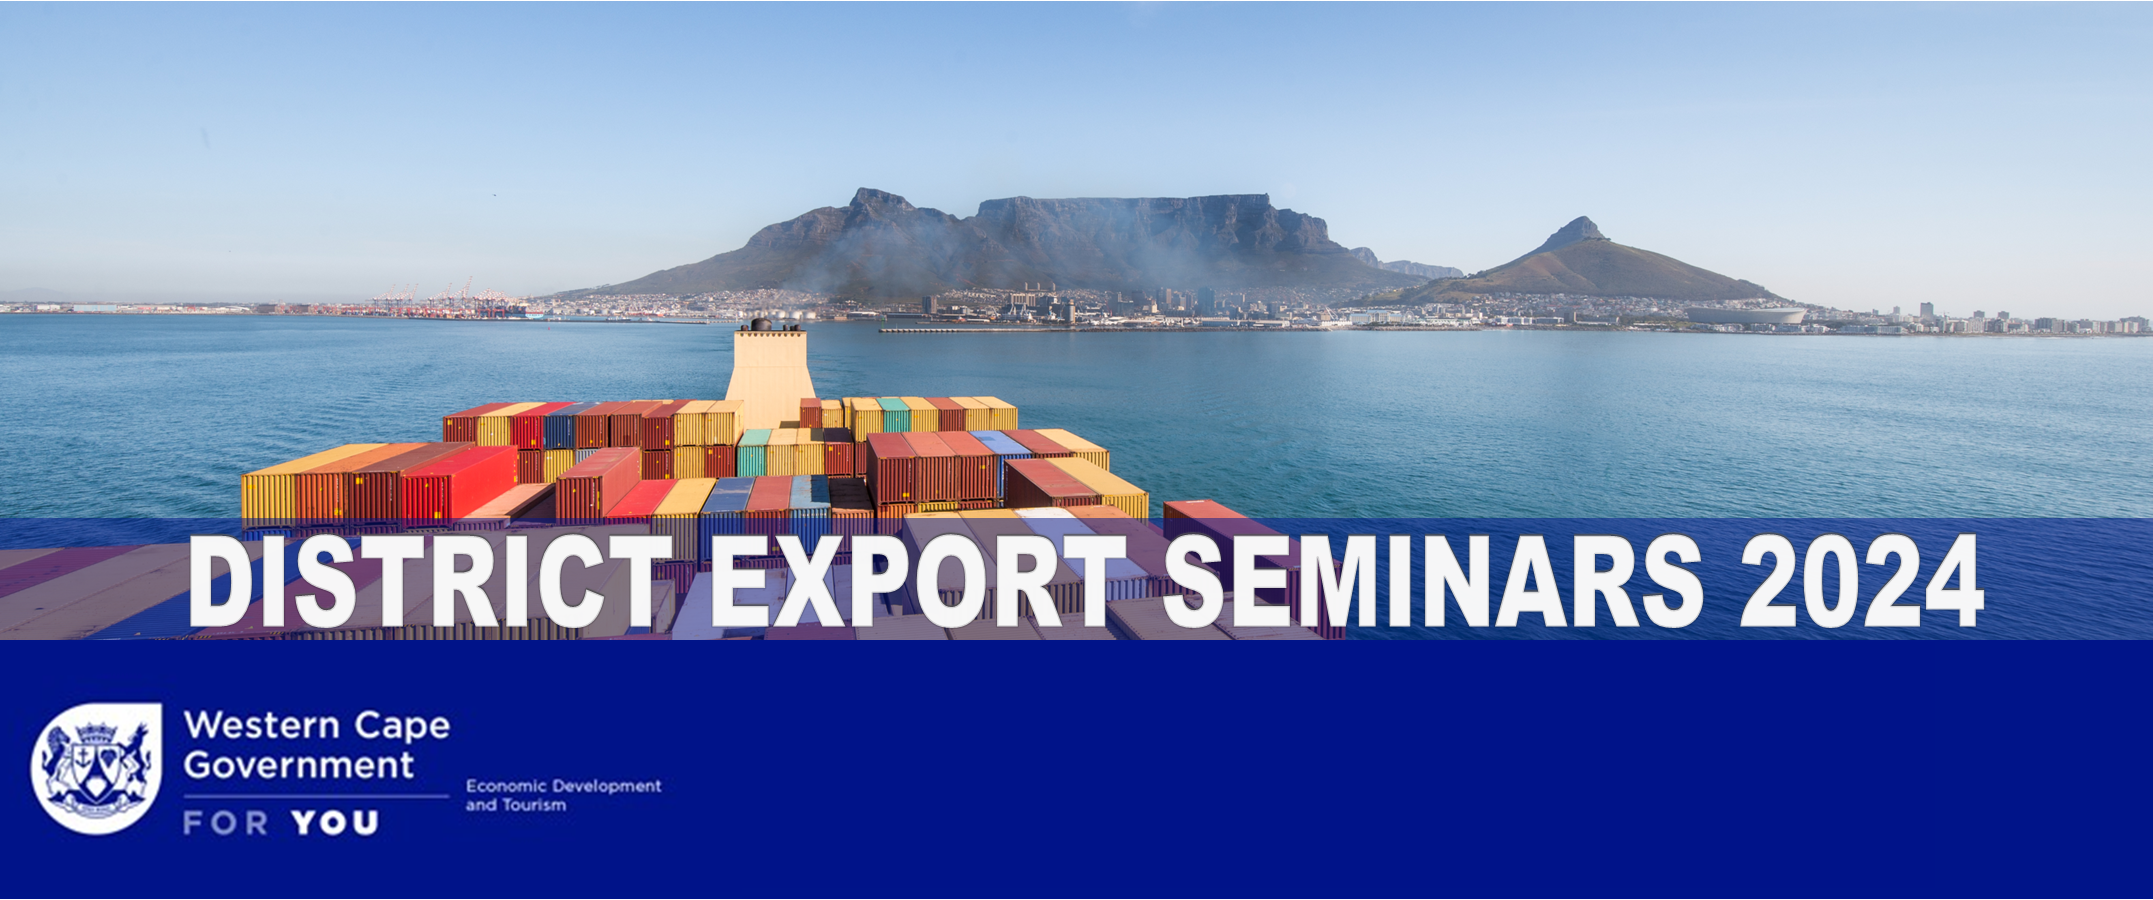 district_export_and_outreach_campaign_website_header.png